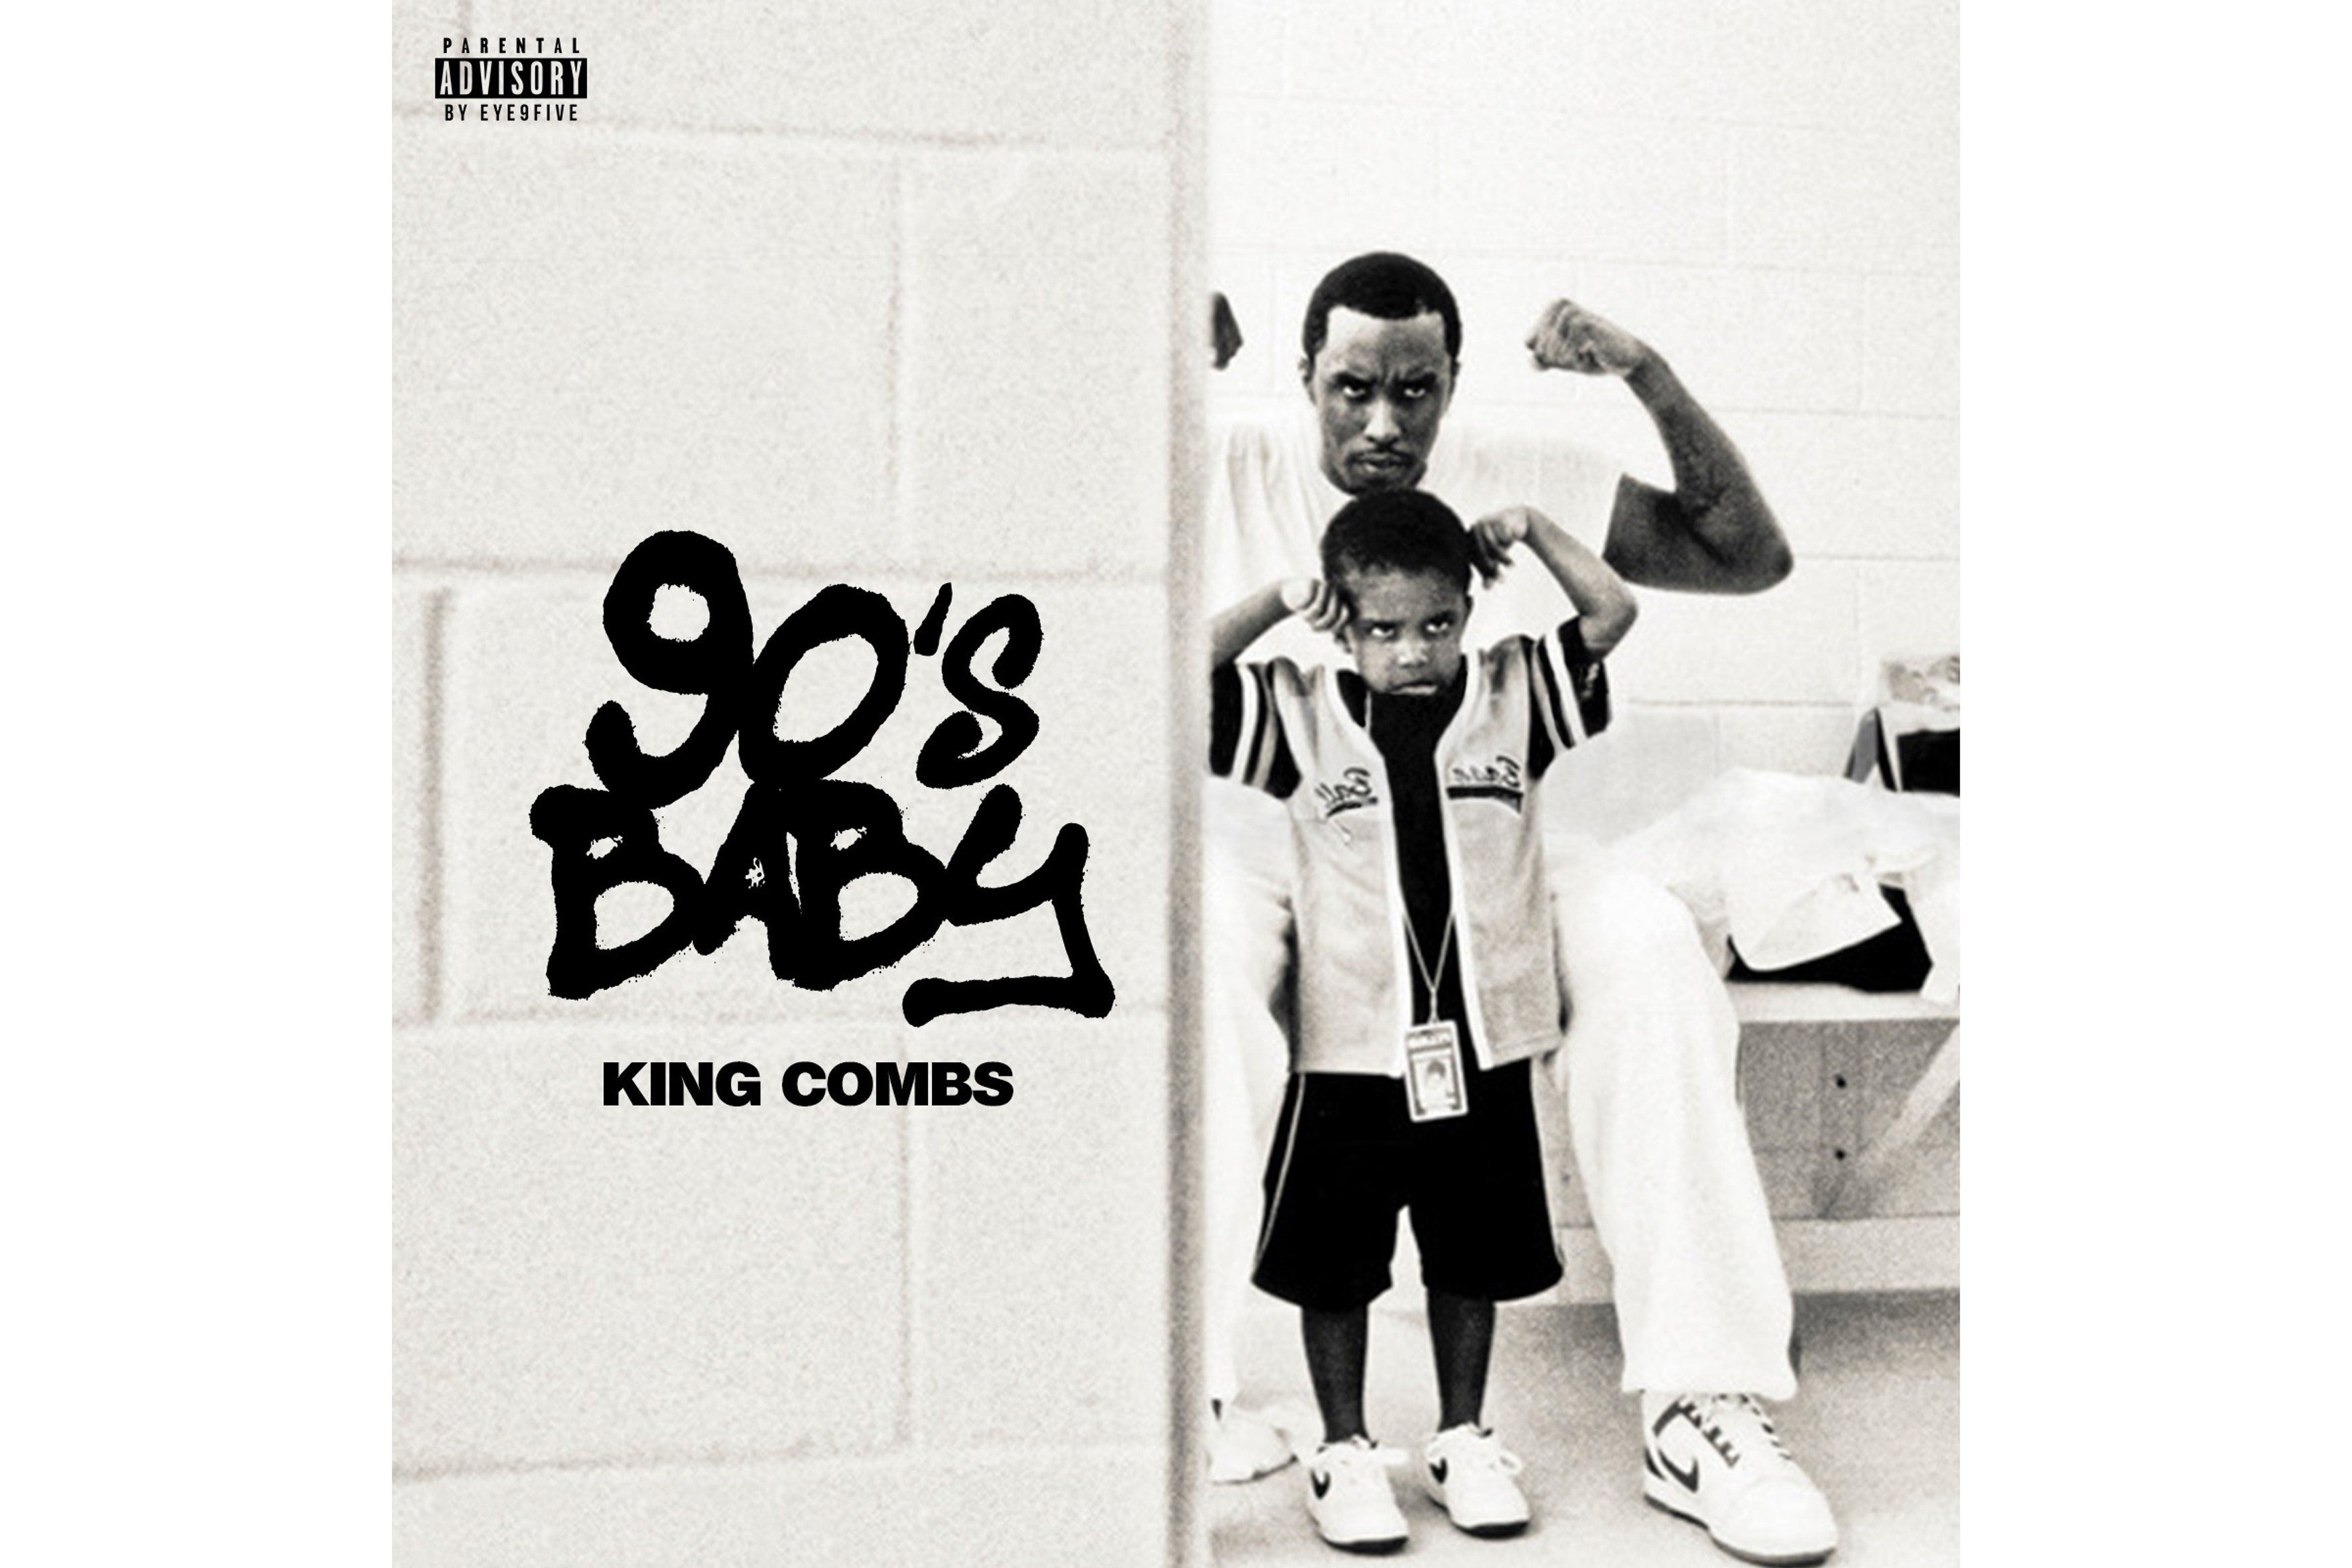 King Combs Shows His Maturity On ’90’s Baby’ Mixtape [STREAM]